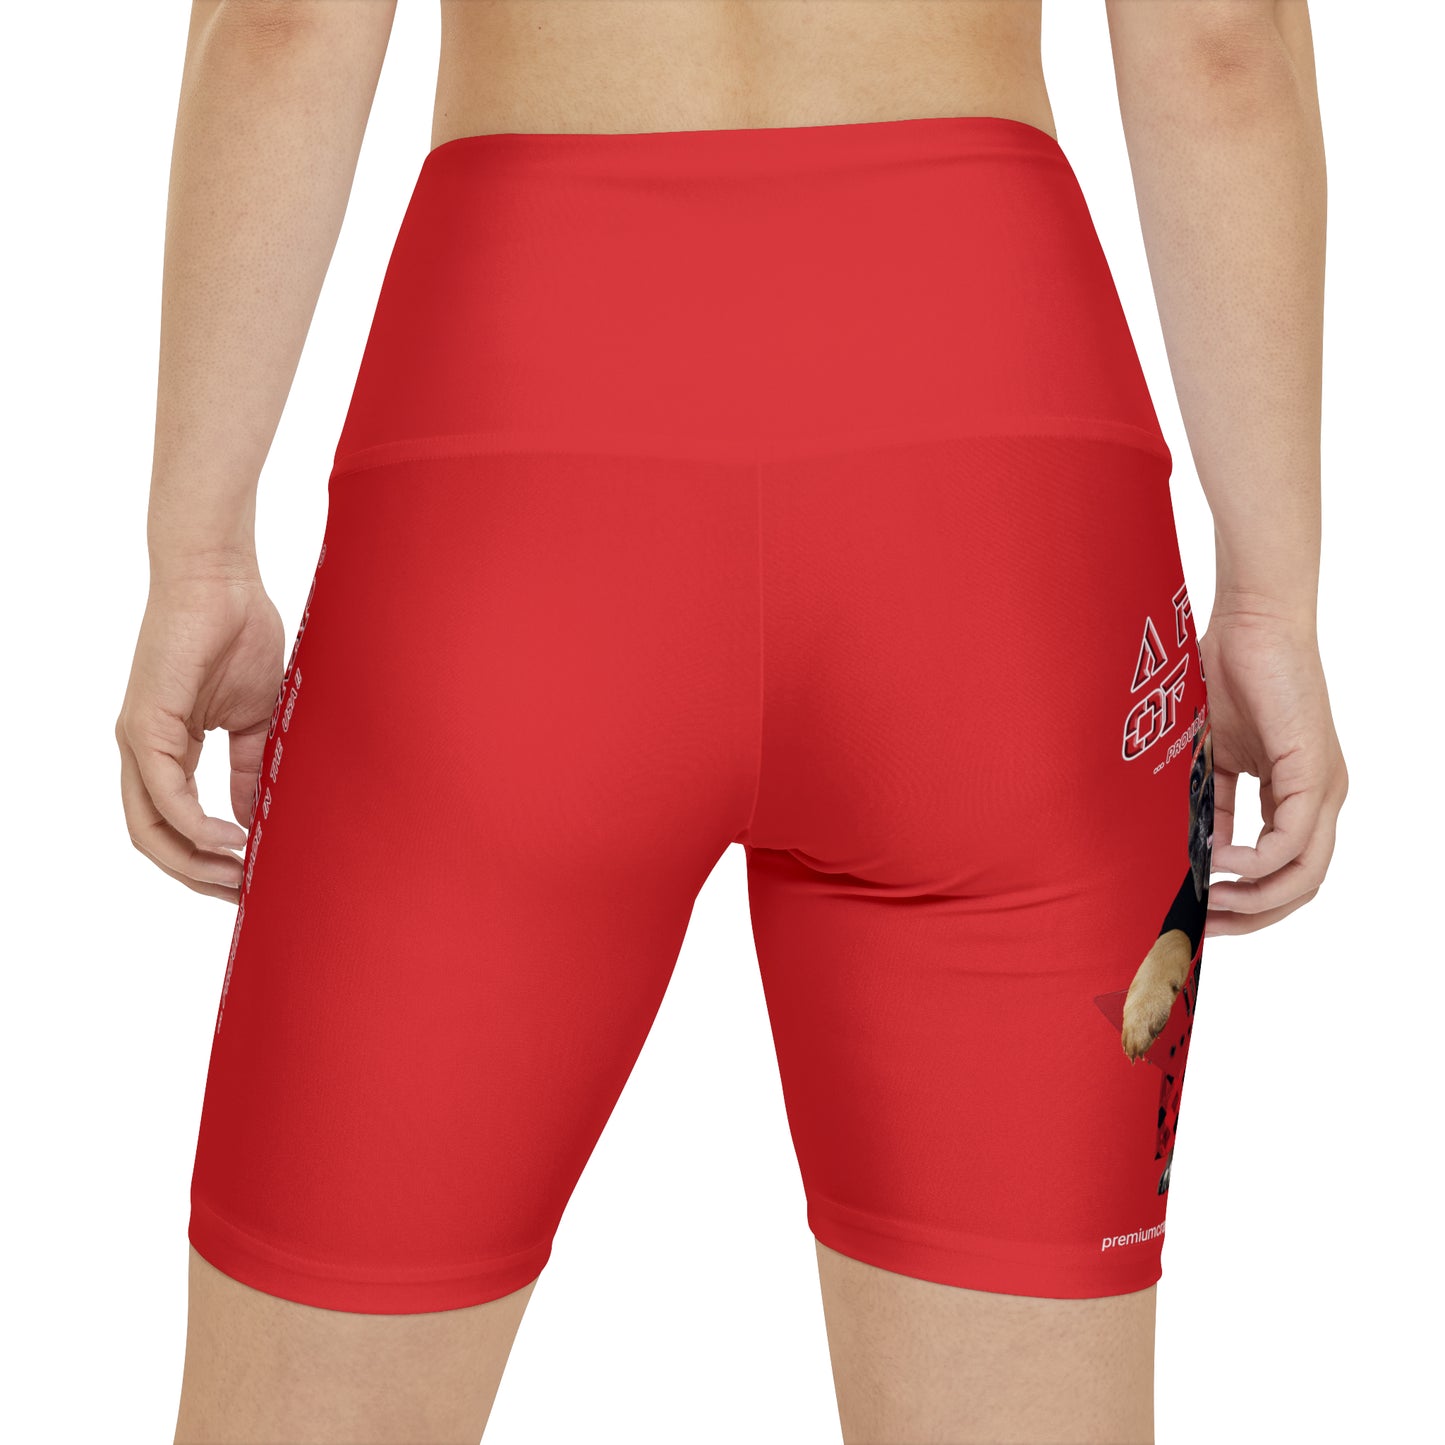 A Piece Of Crap II Women's Workout Shorts - Red